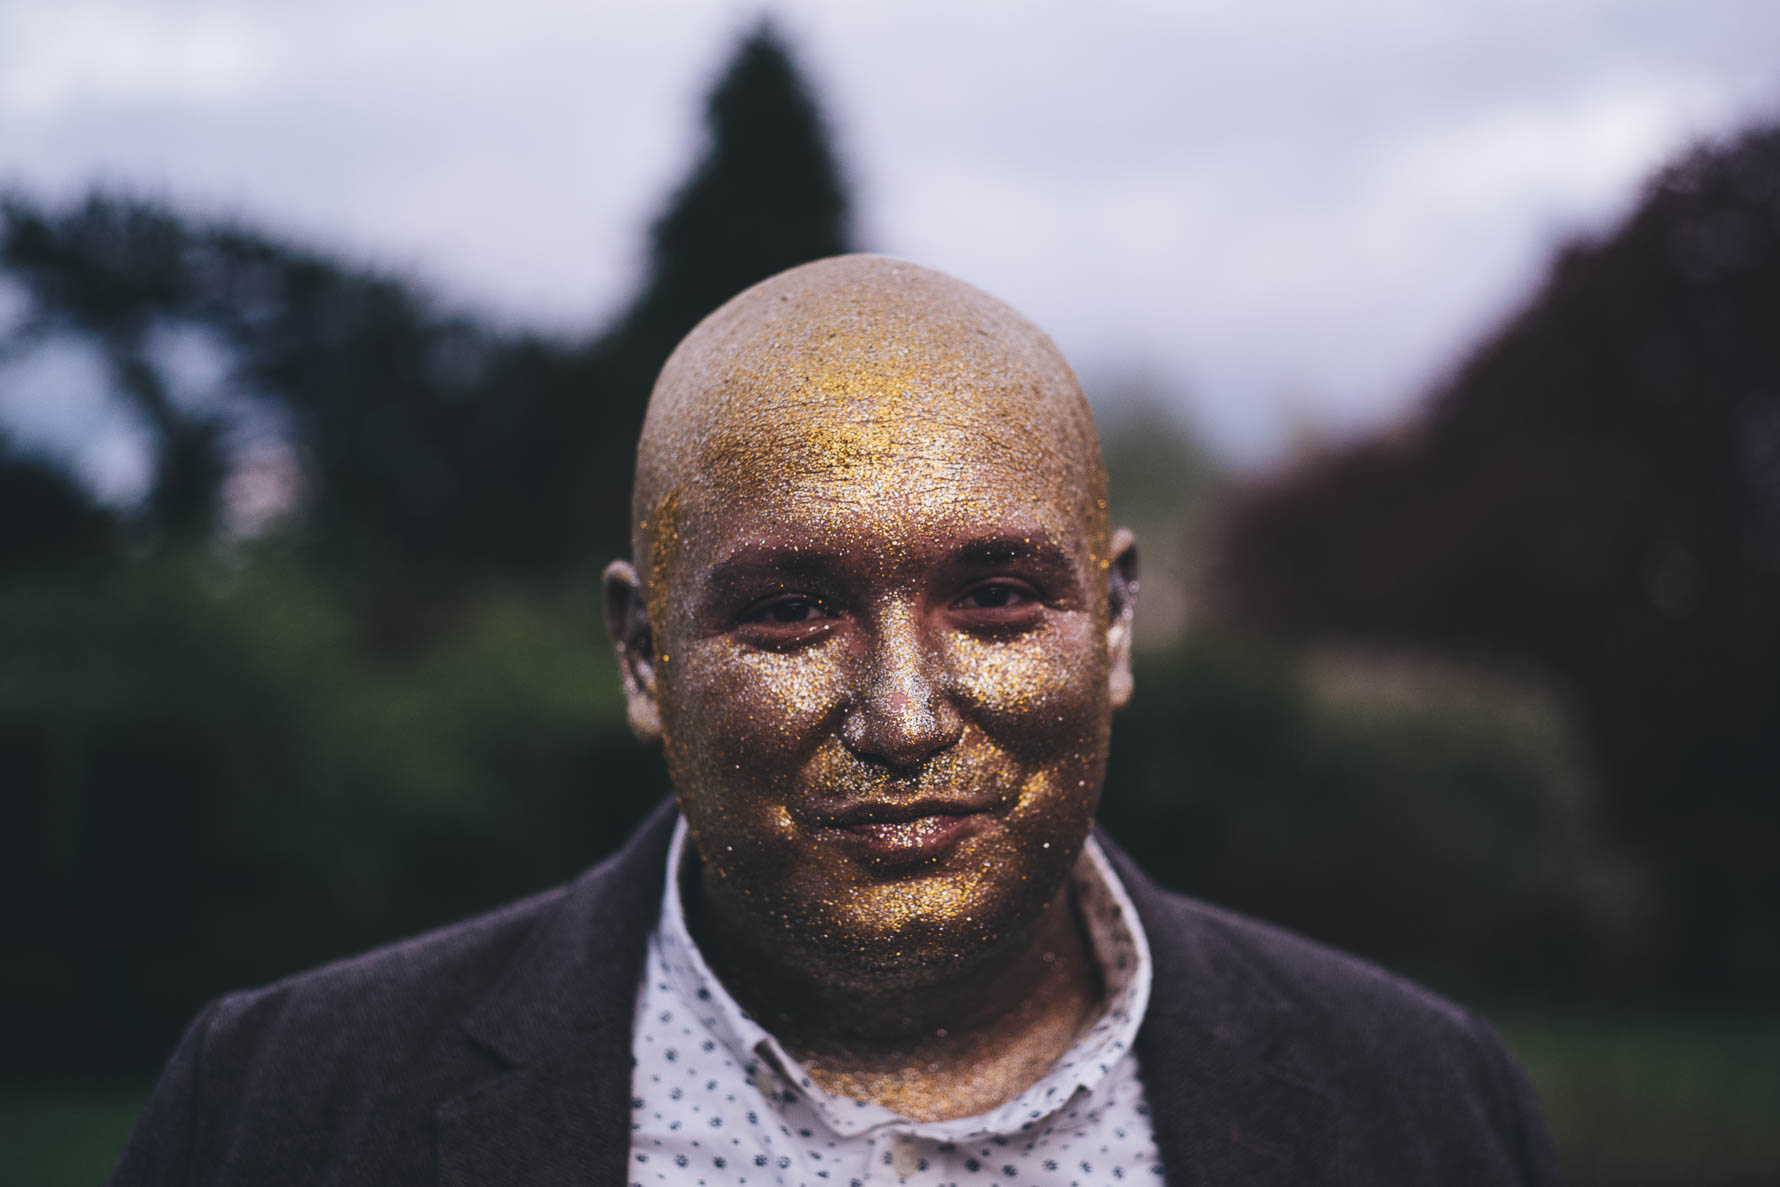 man with whole face painted in glitter